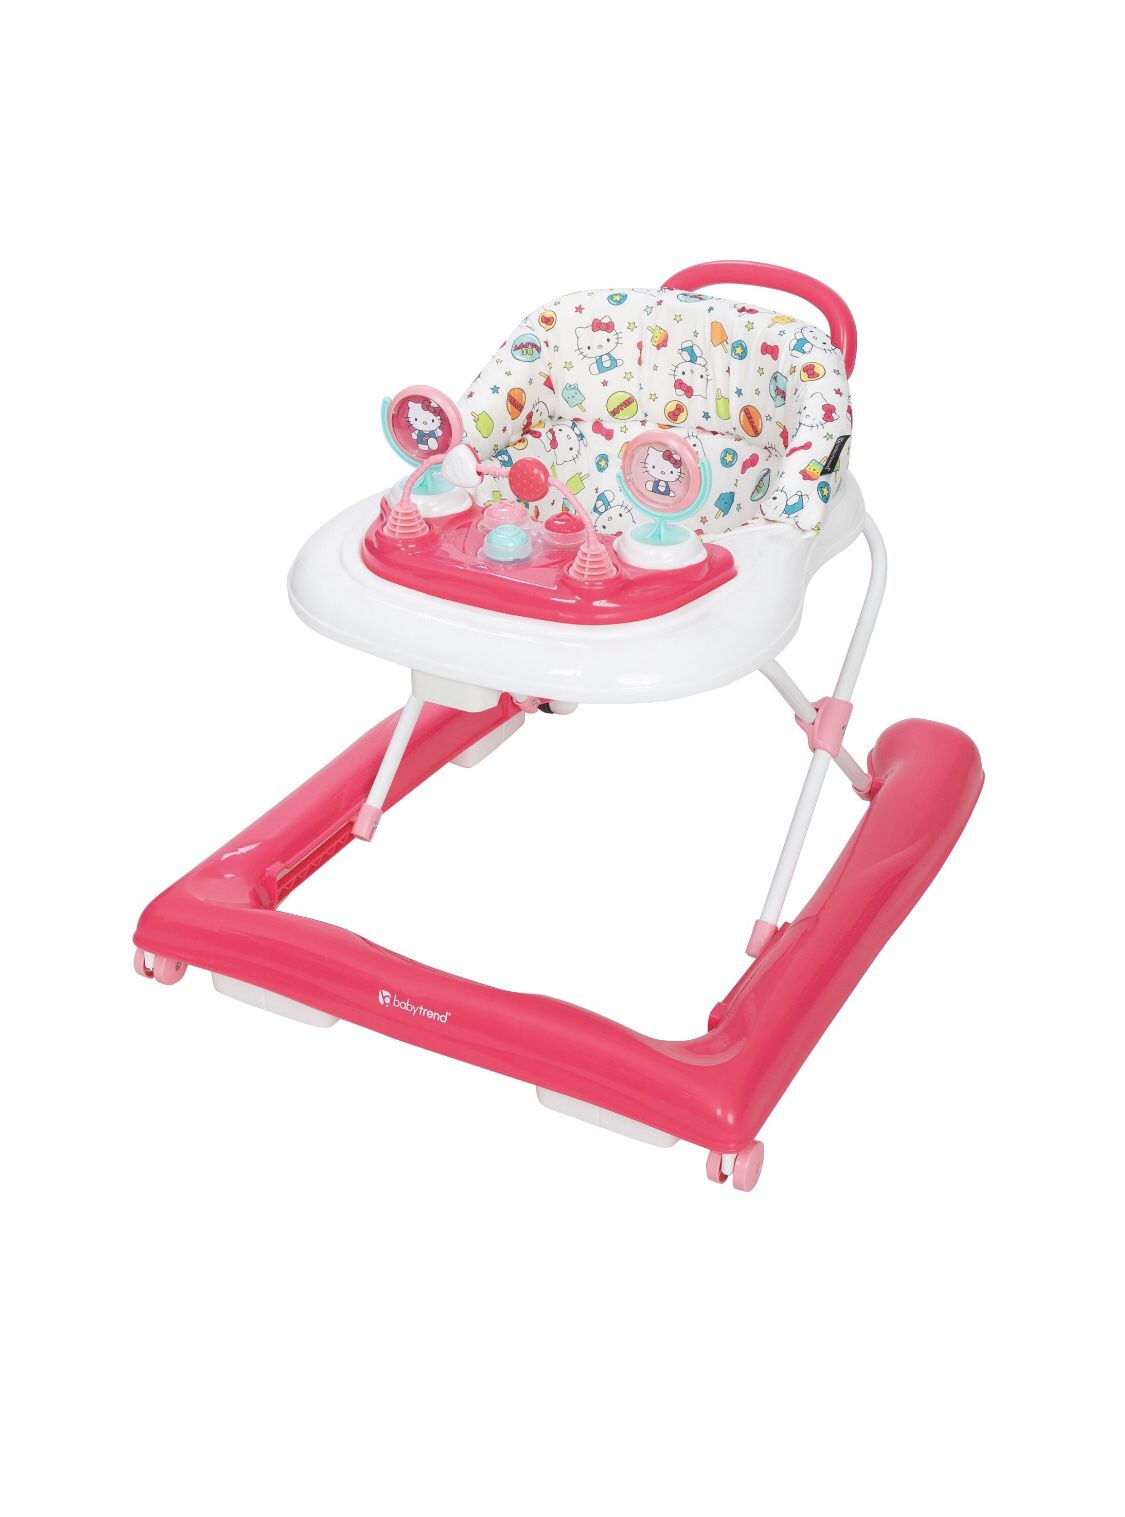 Hello Kitty Walker- great time ride in and push